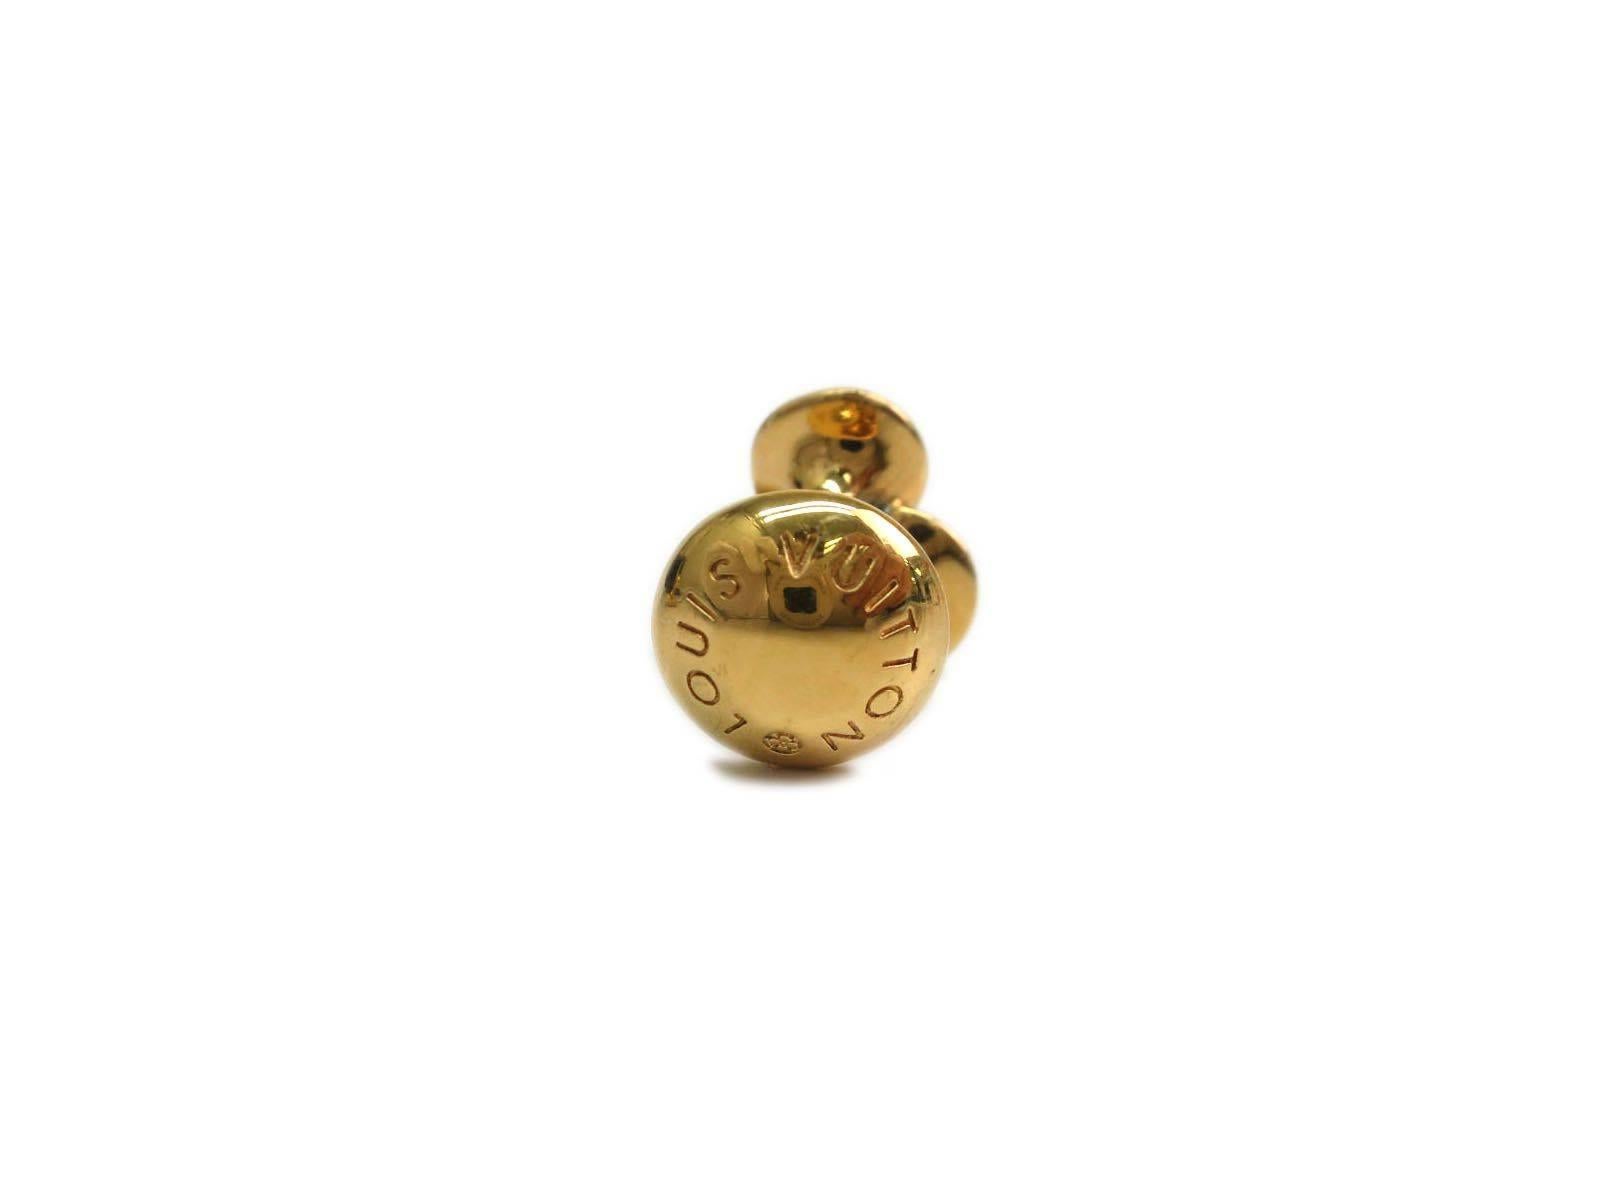 CURATOR'S NOTES

Now, you're fully dressed.  Dapper Louis Vuitton logo gold tone cufflinks.

Metal
Gold tone
Made in France
Date code MI1006
Measures 0.6" W x 0.8"H
Includes original Louis Vuitton leather storage pouch